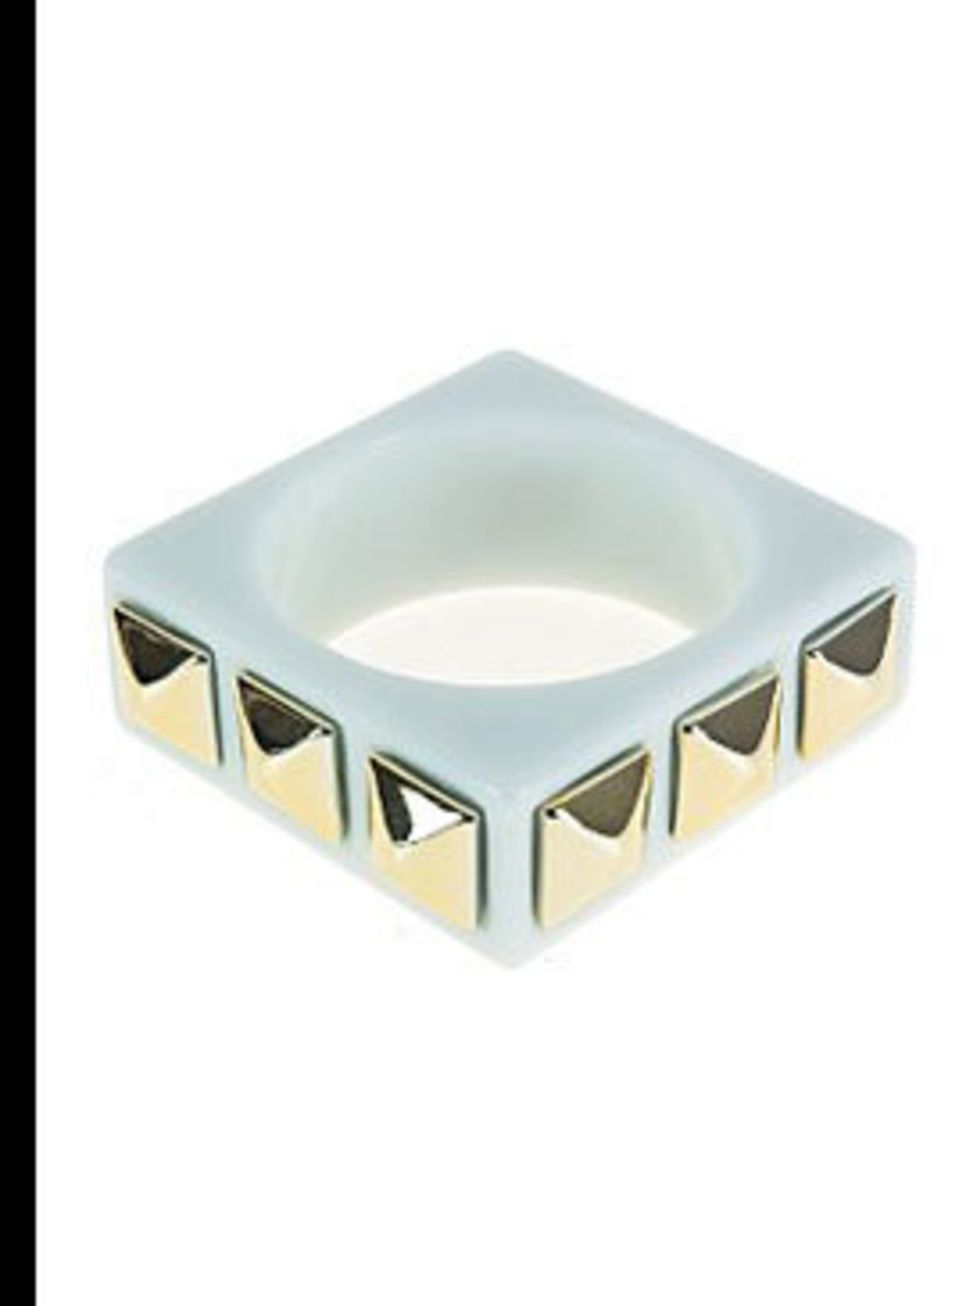 <p>Square studded bangle, £14, by Therapy at <a href="www.houseoffraser.co.uk">House of Fraser</a></p>